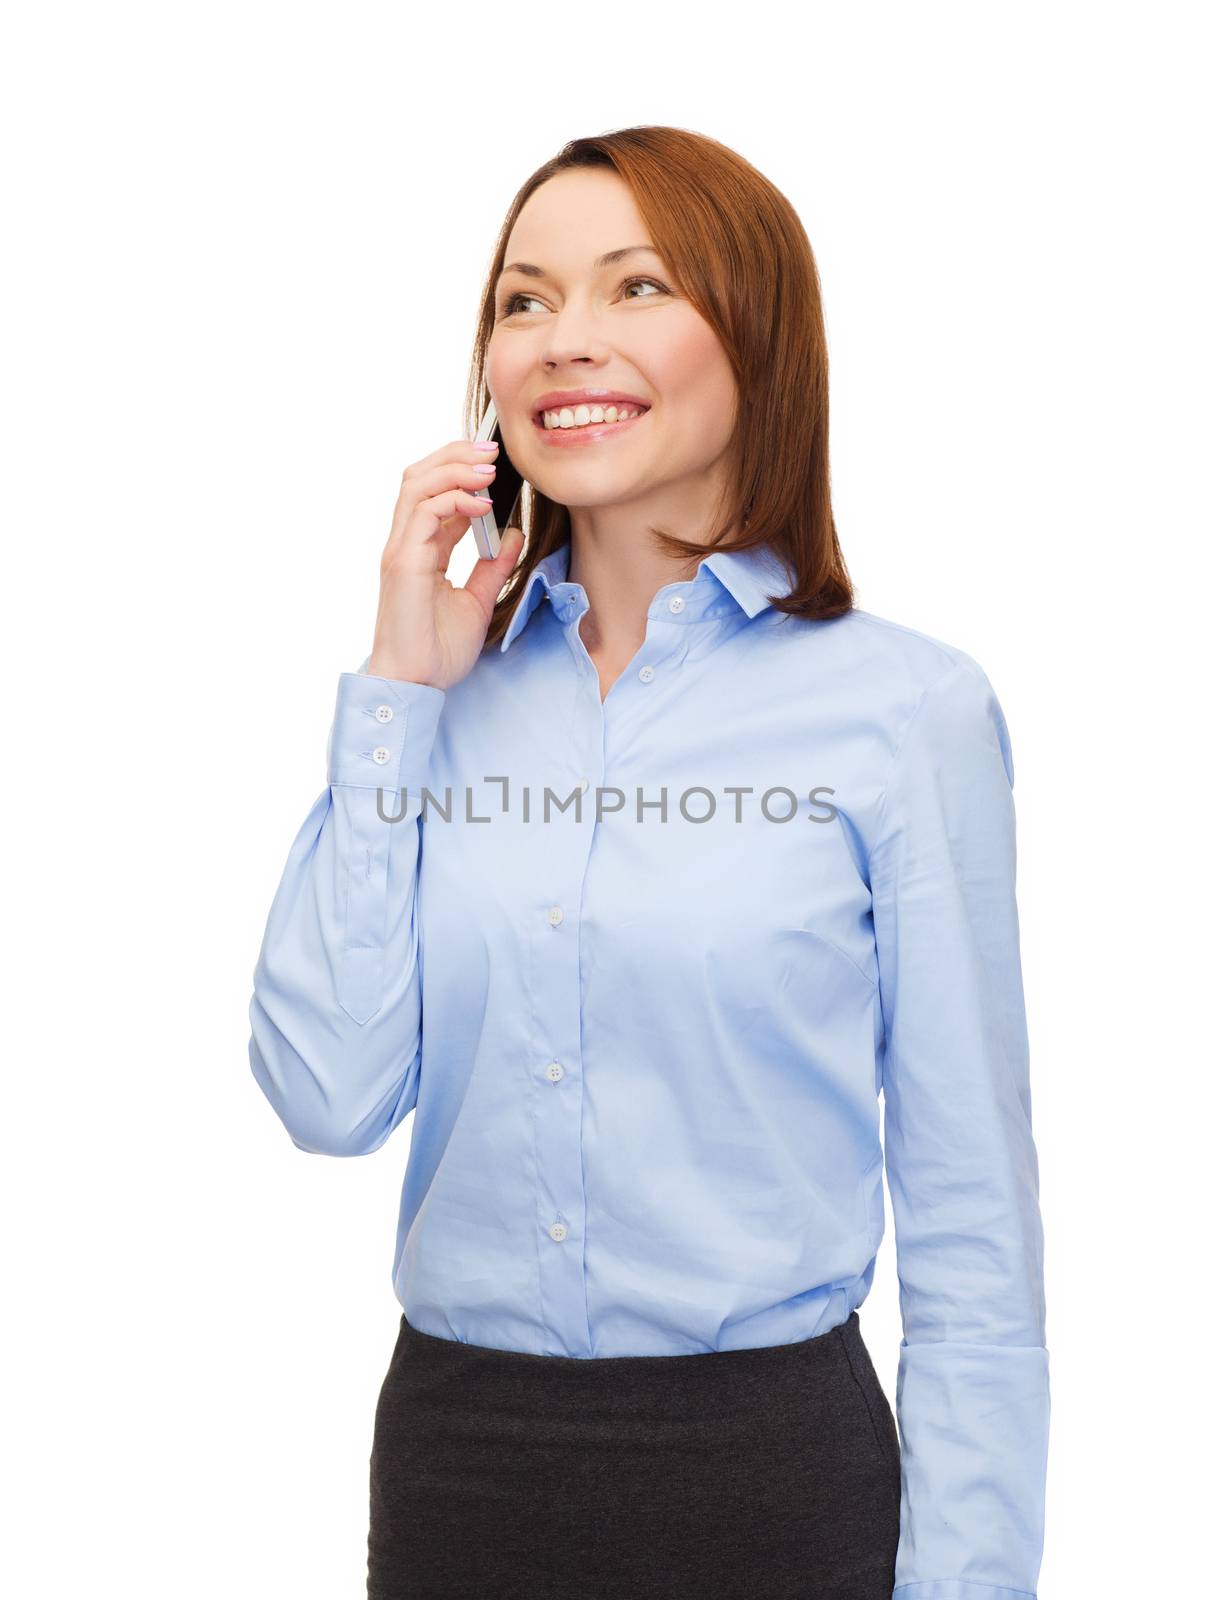 young smiling businesswoman with smartphone by dolgachov